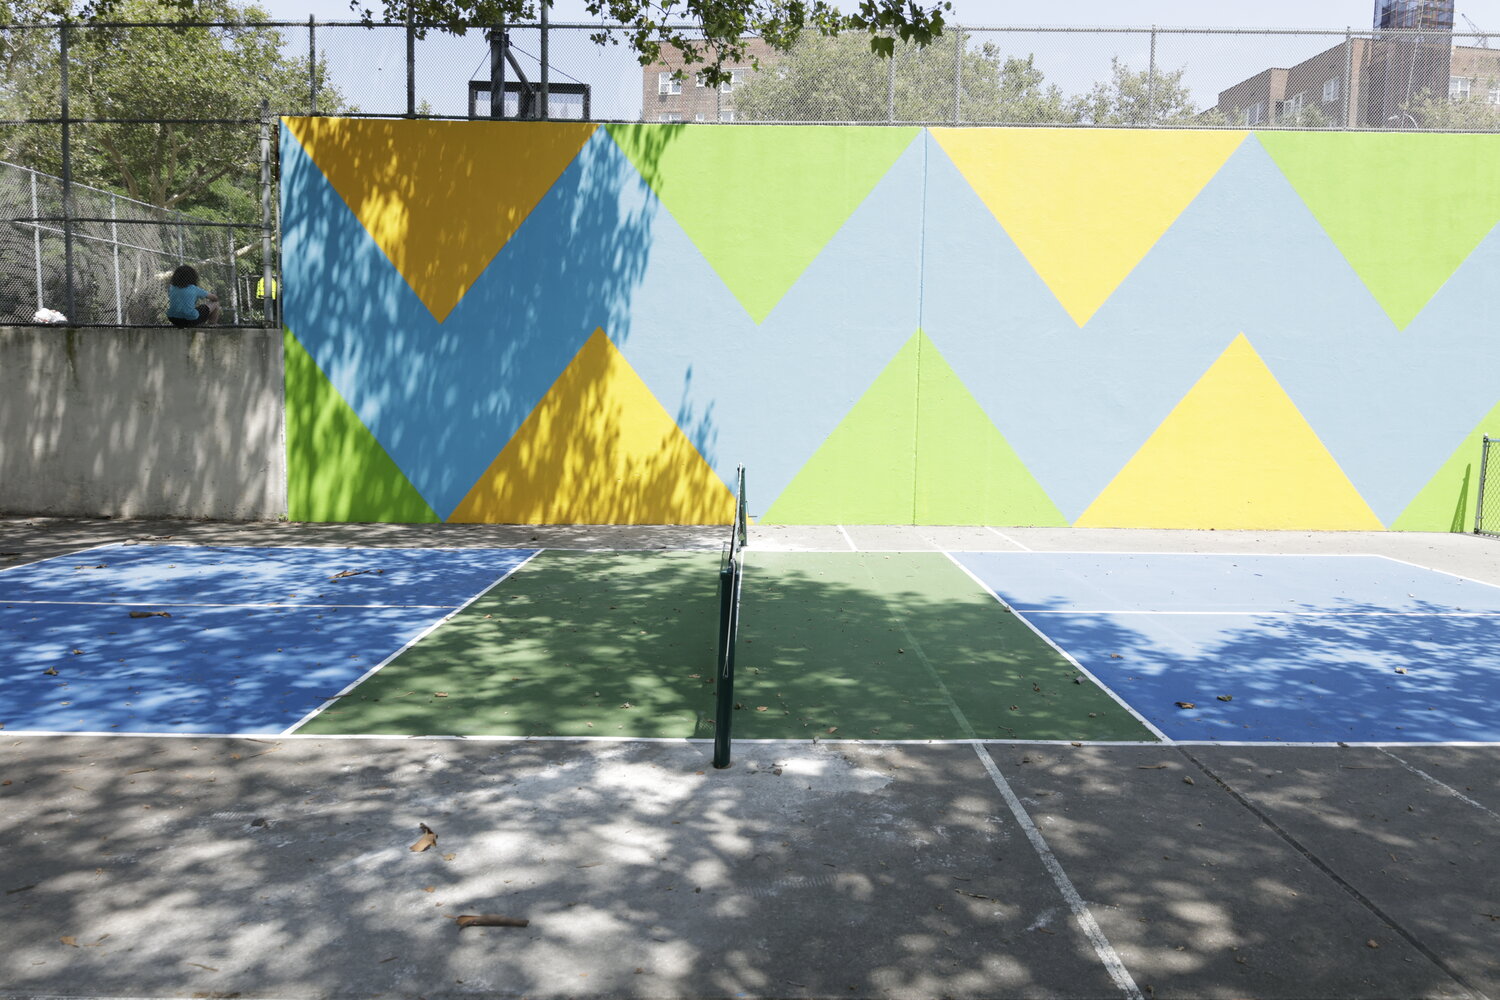 The newly installed pickleball court at Riverdale Playground is adjacent to handball courts.  Sometimes balls in play during pickleball wind up on the handball courts because there is no fence.